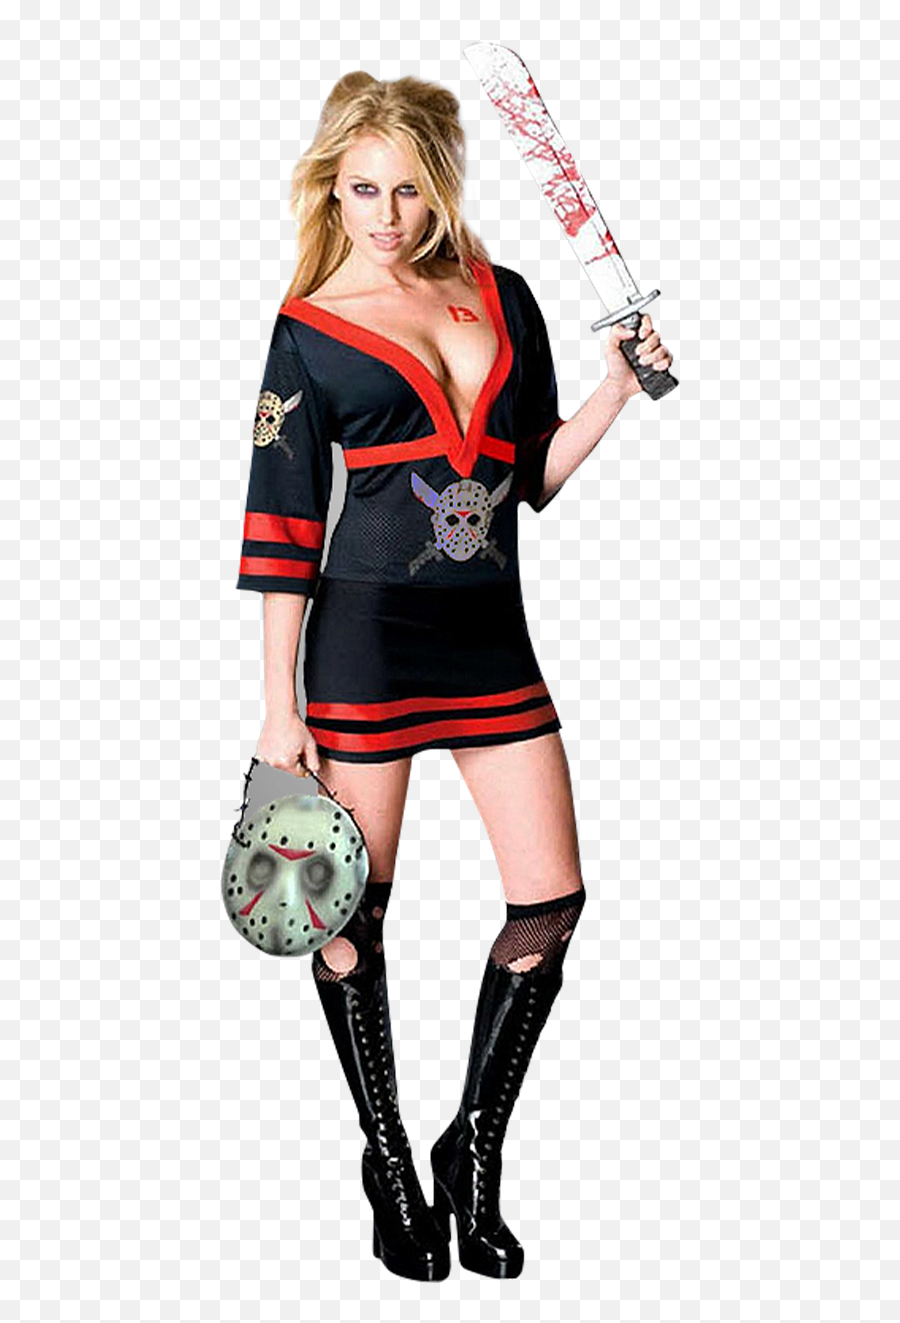 Friday The 13th Miss Jason Voorhees Costume - Sexy Jason Voorhees Costume Png,Jason Voorhees Mask Png